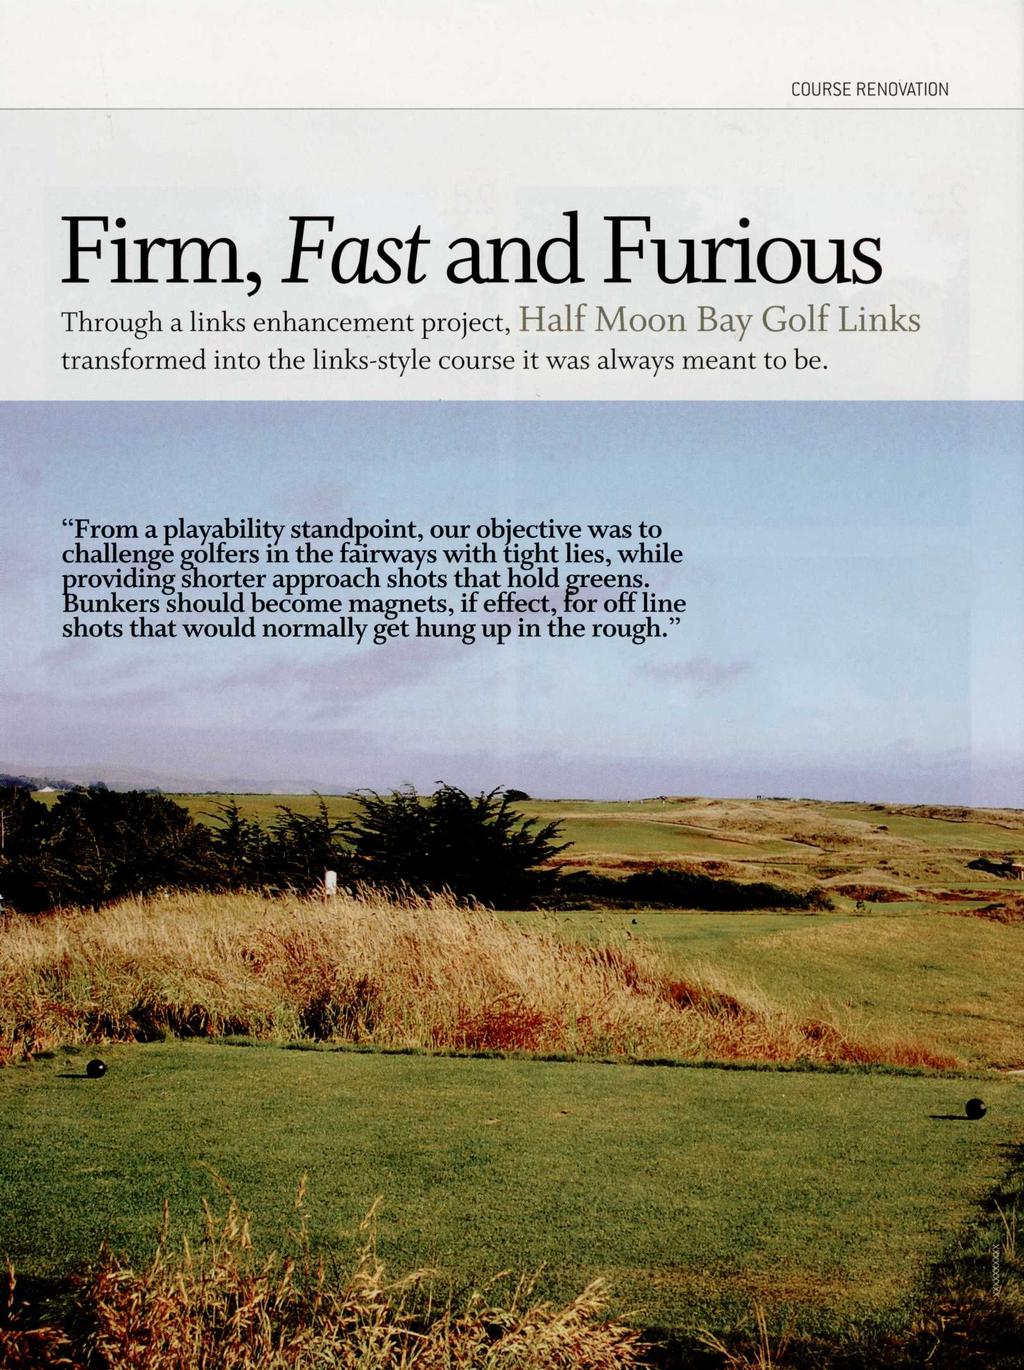 Firm, Fast and Furious Through a links enhancement project, Half Moon Bay Golf Links transformed into the links-style course it was always meant to be.